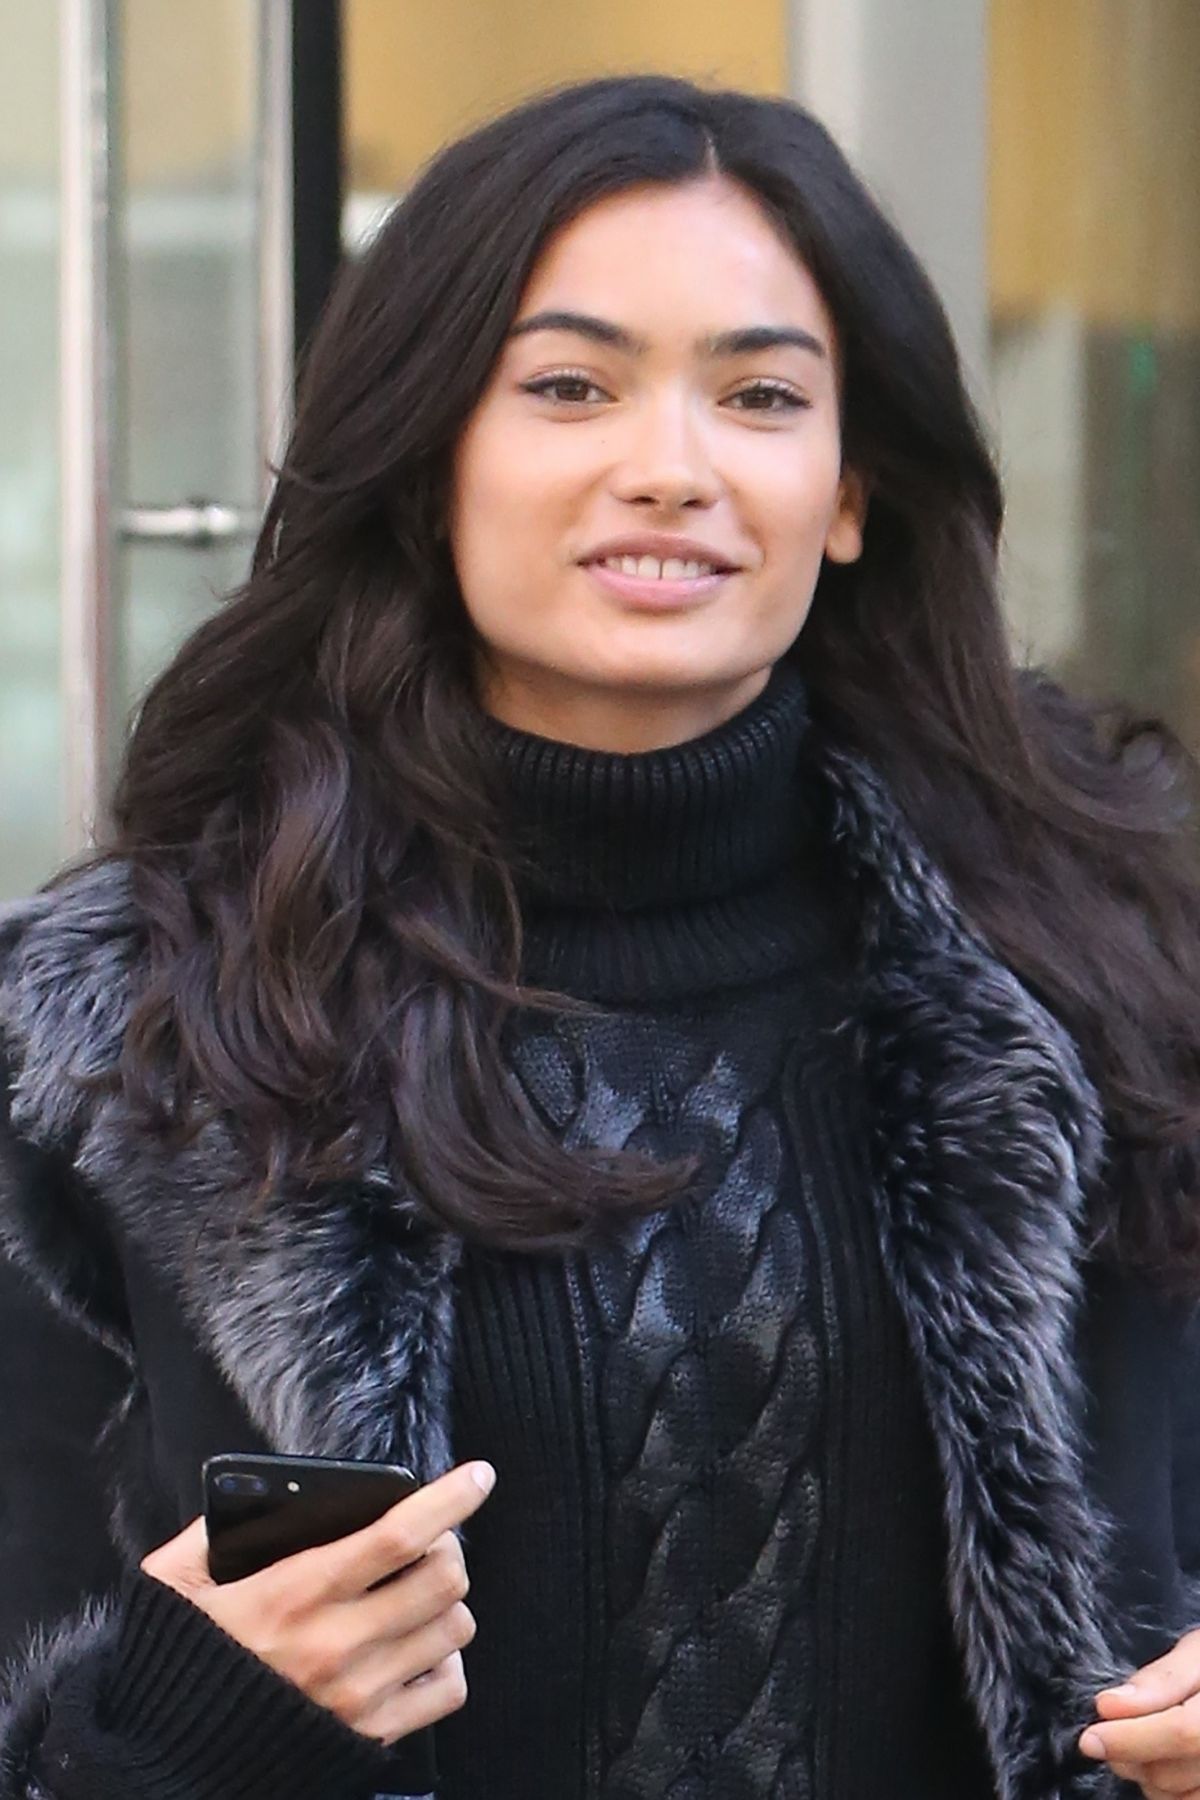 KELLY GALE at Victoria’s Secret Fashion Show Fittings in New York 11/01 ...